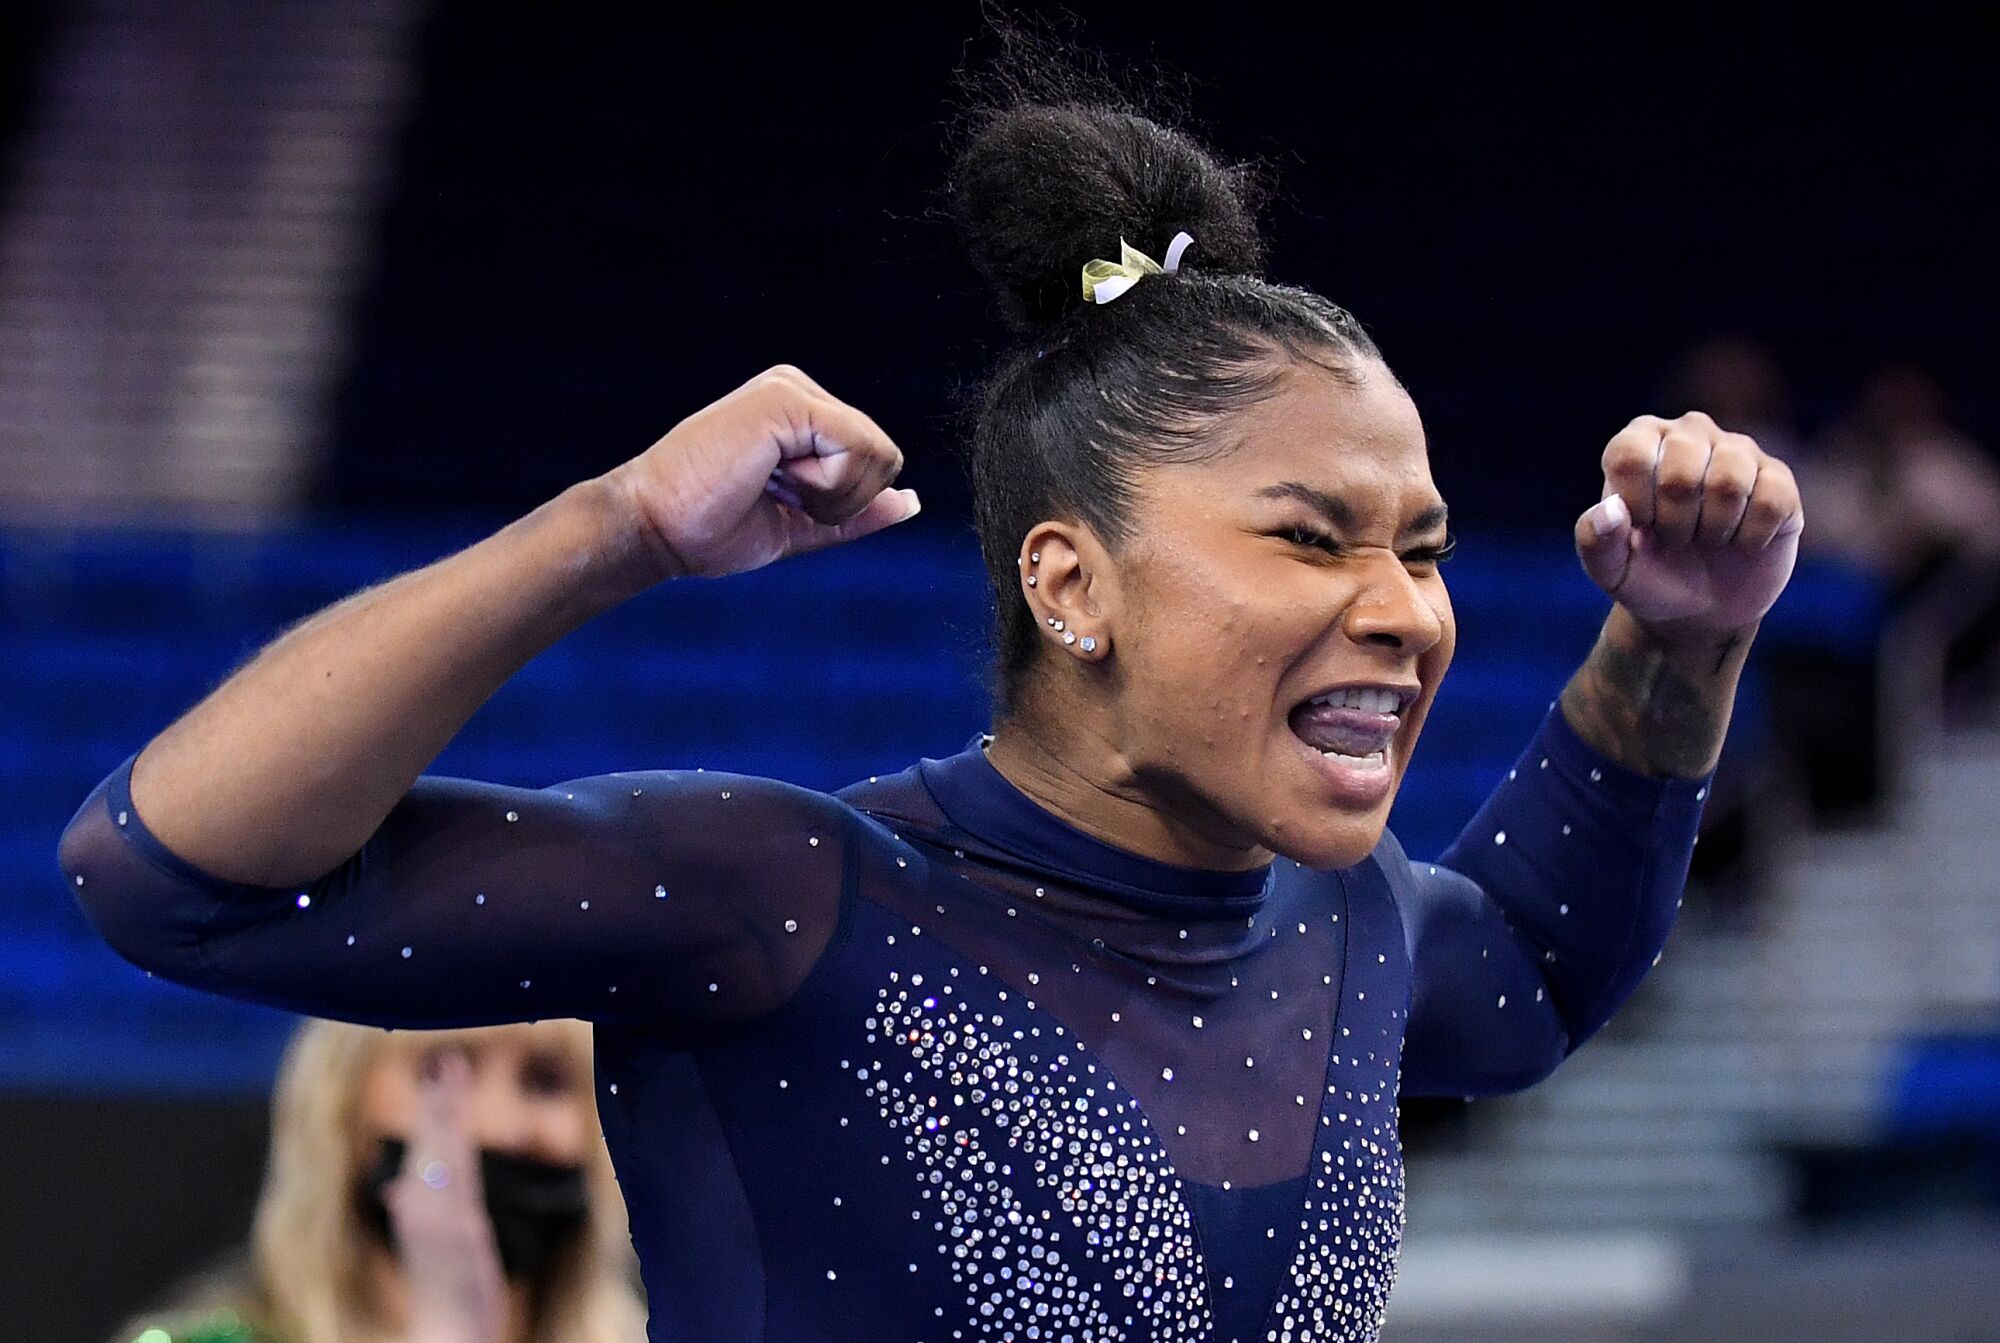 UCLA's Jordan Chiles raises her fists and smiles after her routine on the balance beam.